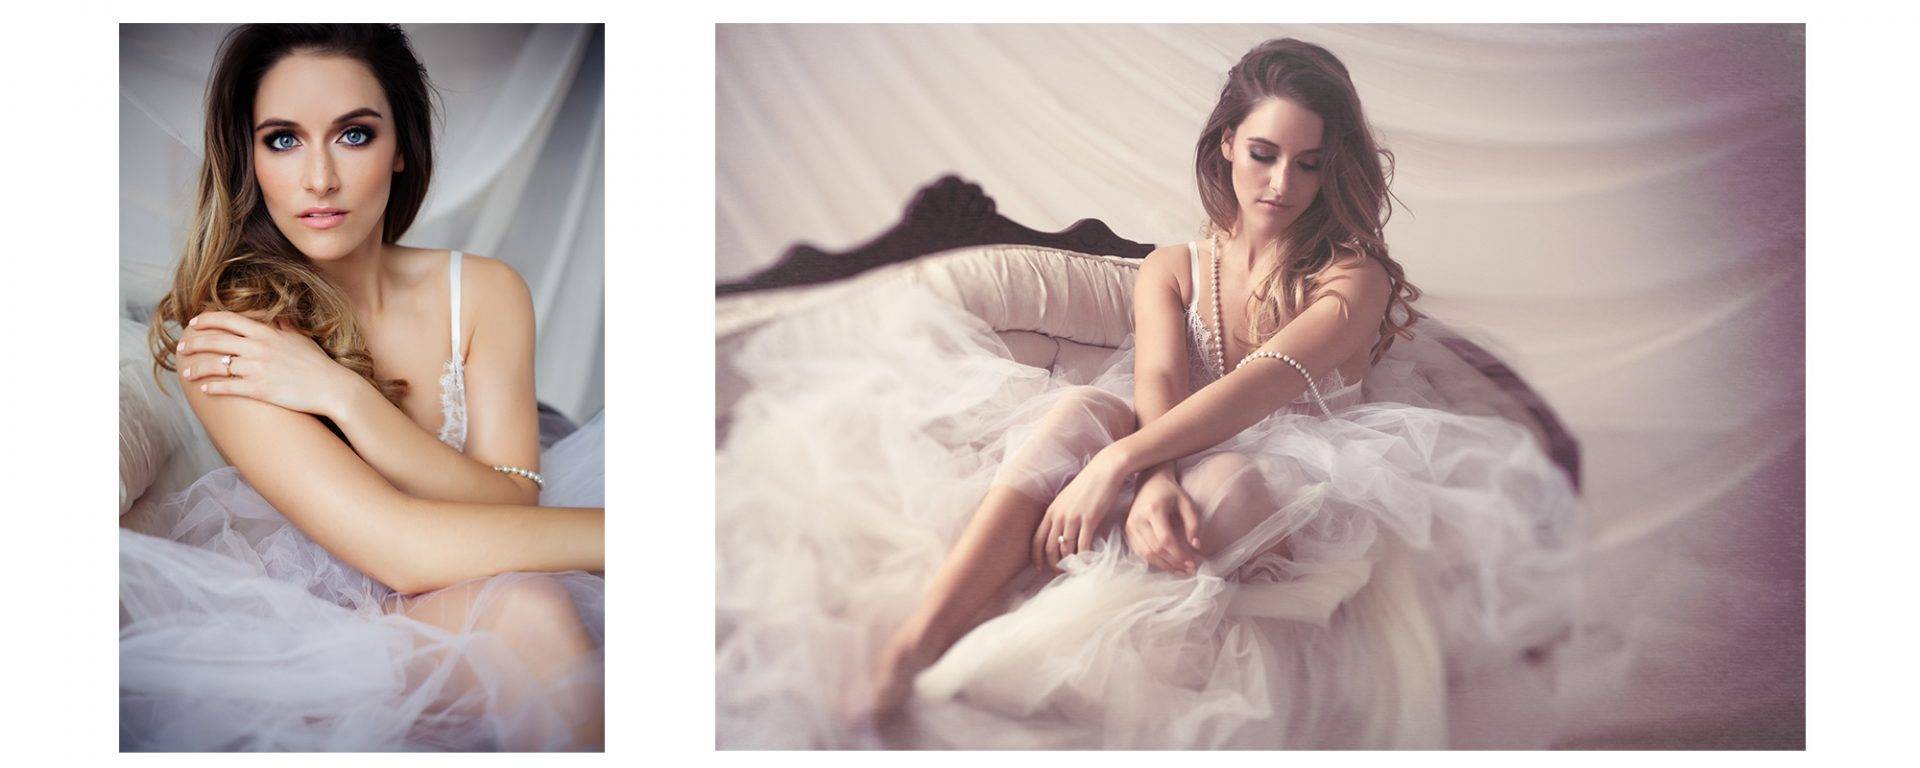 Lady with pearls and white lingerie for a bridal boudoir photoshoot.